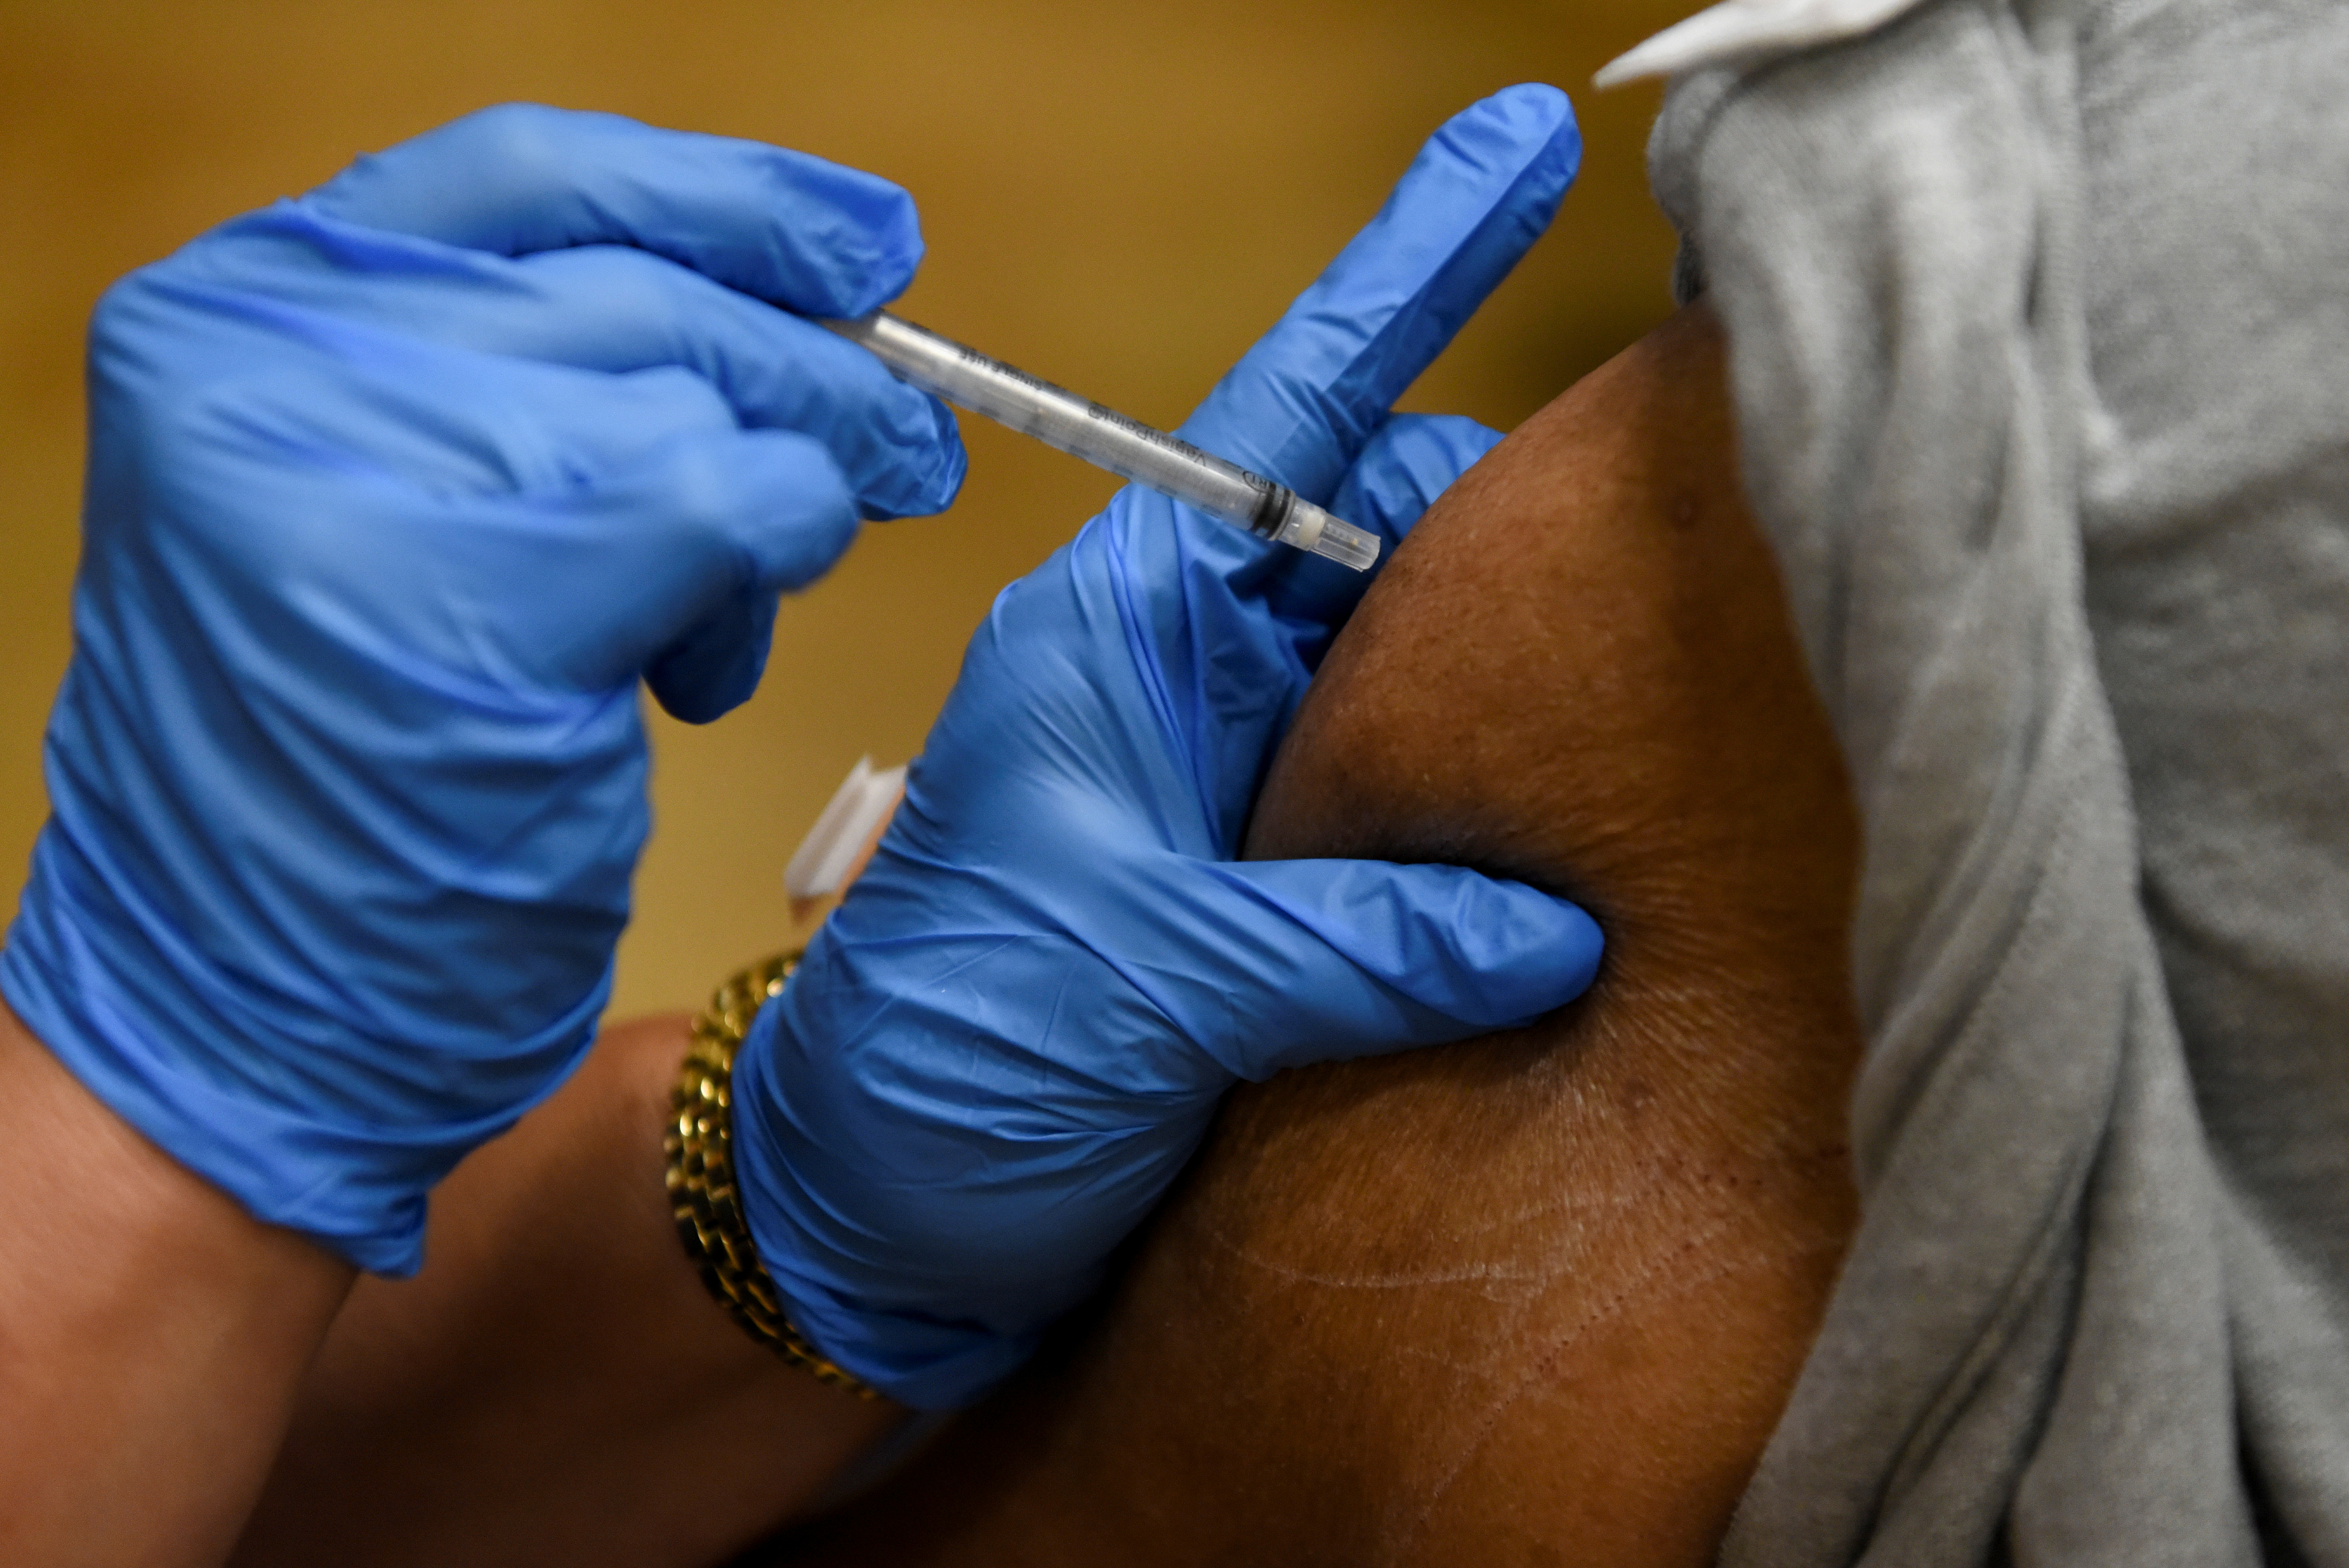 A person receives a vaccine for the coronavirus disease (COVID-19) following Republican Governor Greg Abbott's ban on COVID-19 vaccine mandates by any entity, including private employers, at Acres Home Multi-Service Center in Houston, Texas, U.S., October 13, 2021.  REUTERS/Callaghan O'Hare